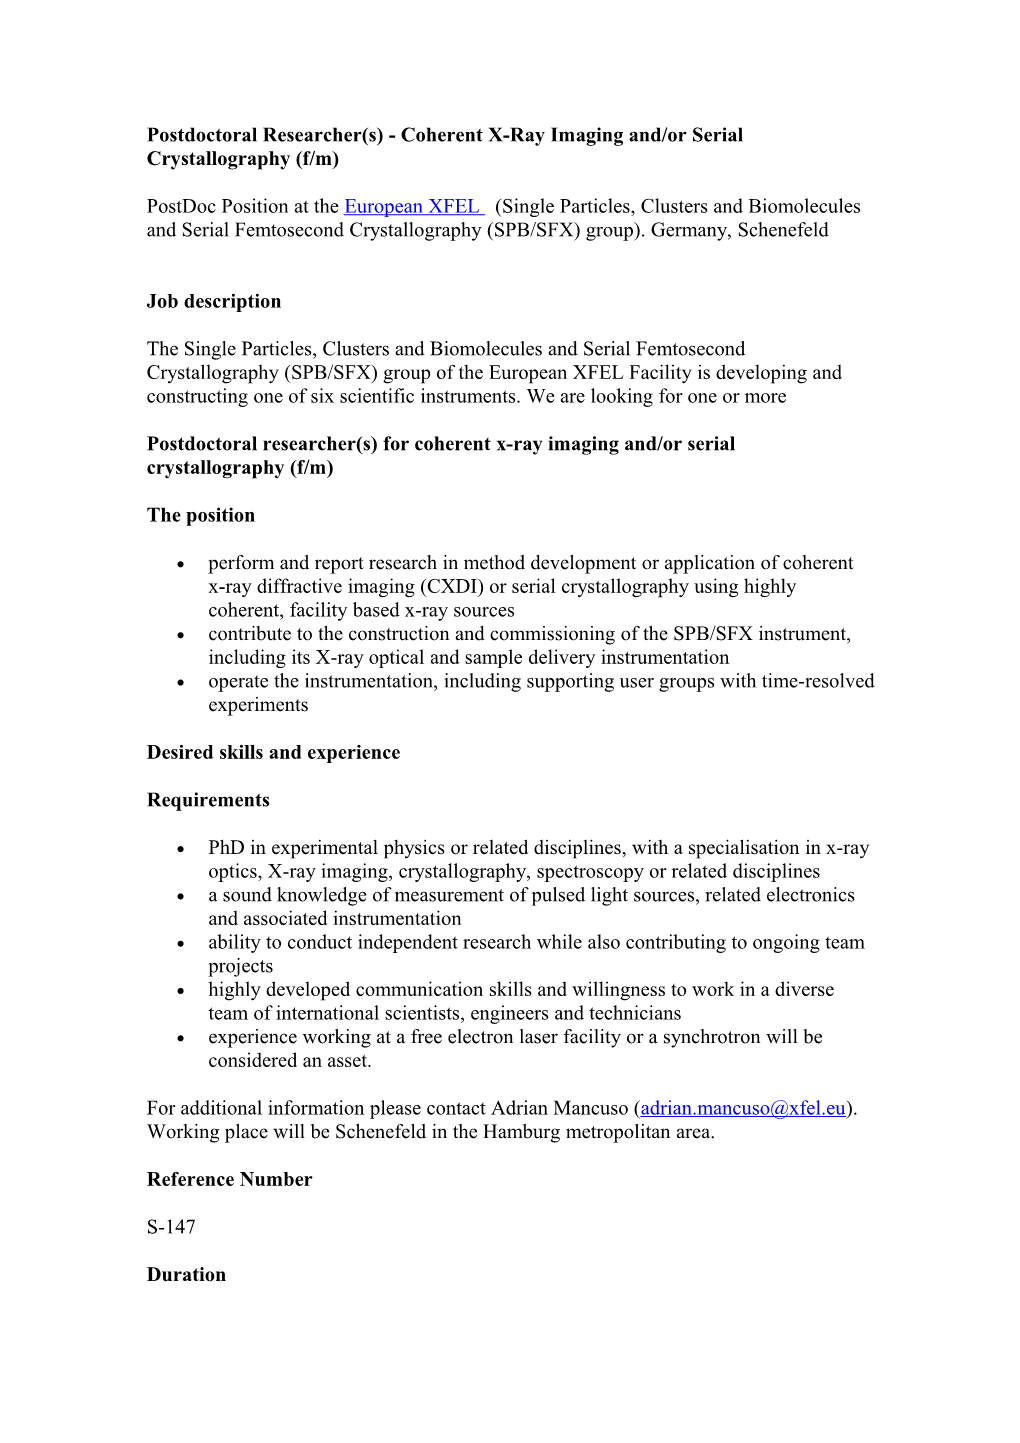 Postdoctoral Researcher(S) - Coherent X-Ray Imaging And/Or Serial Crystallography (F/M)